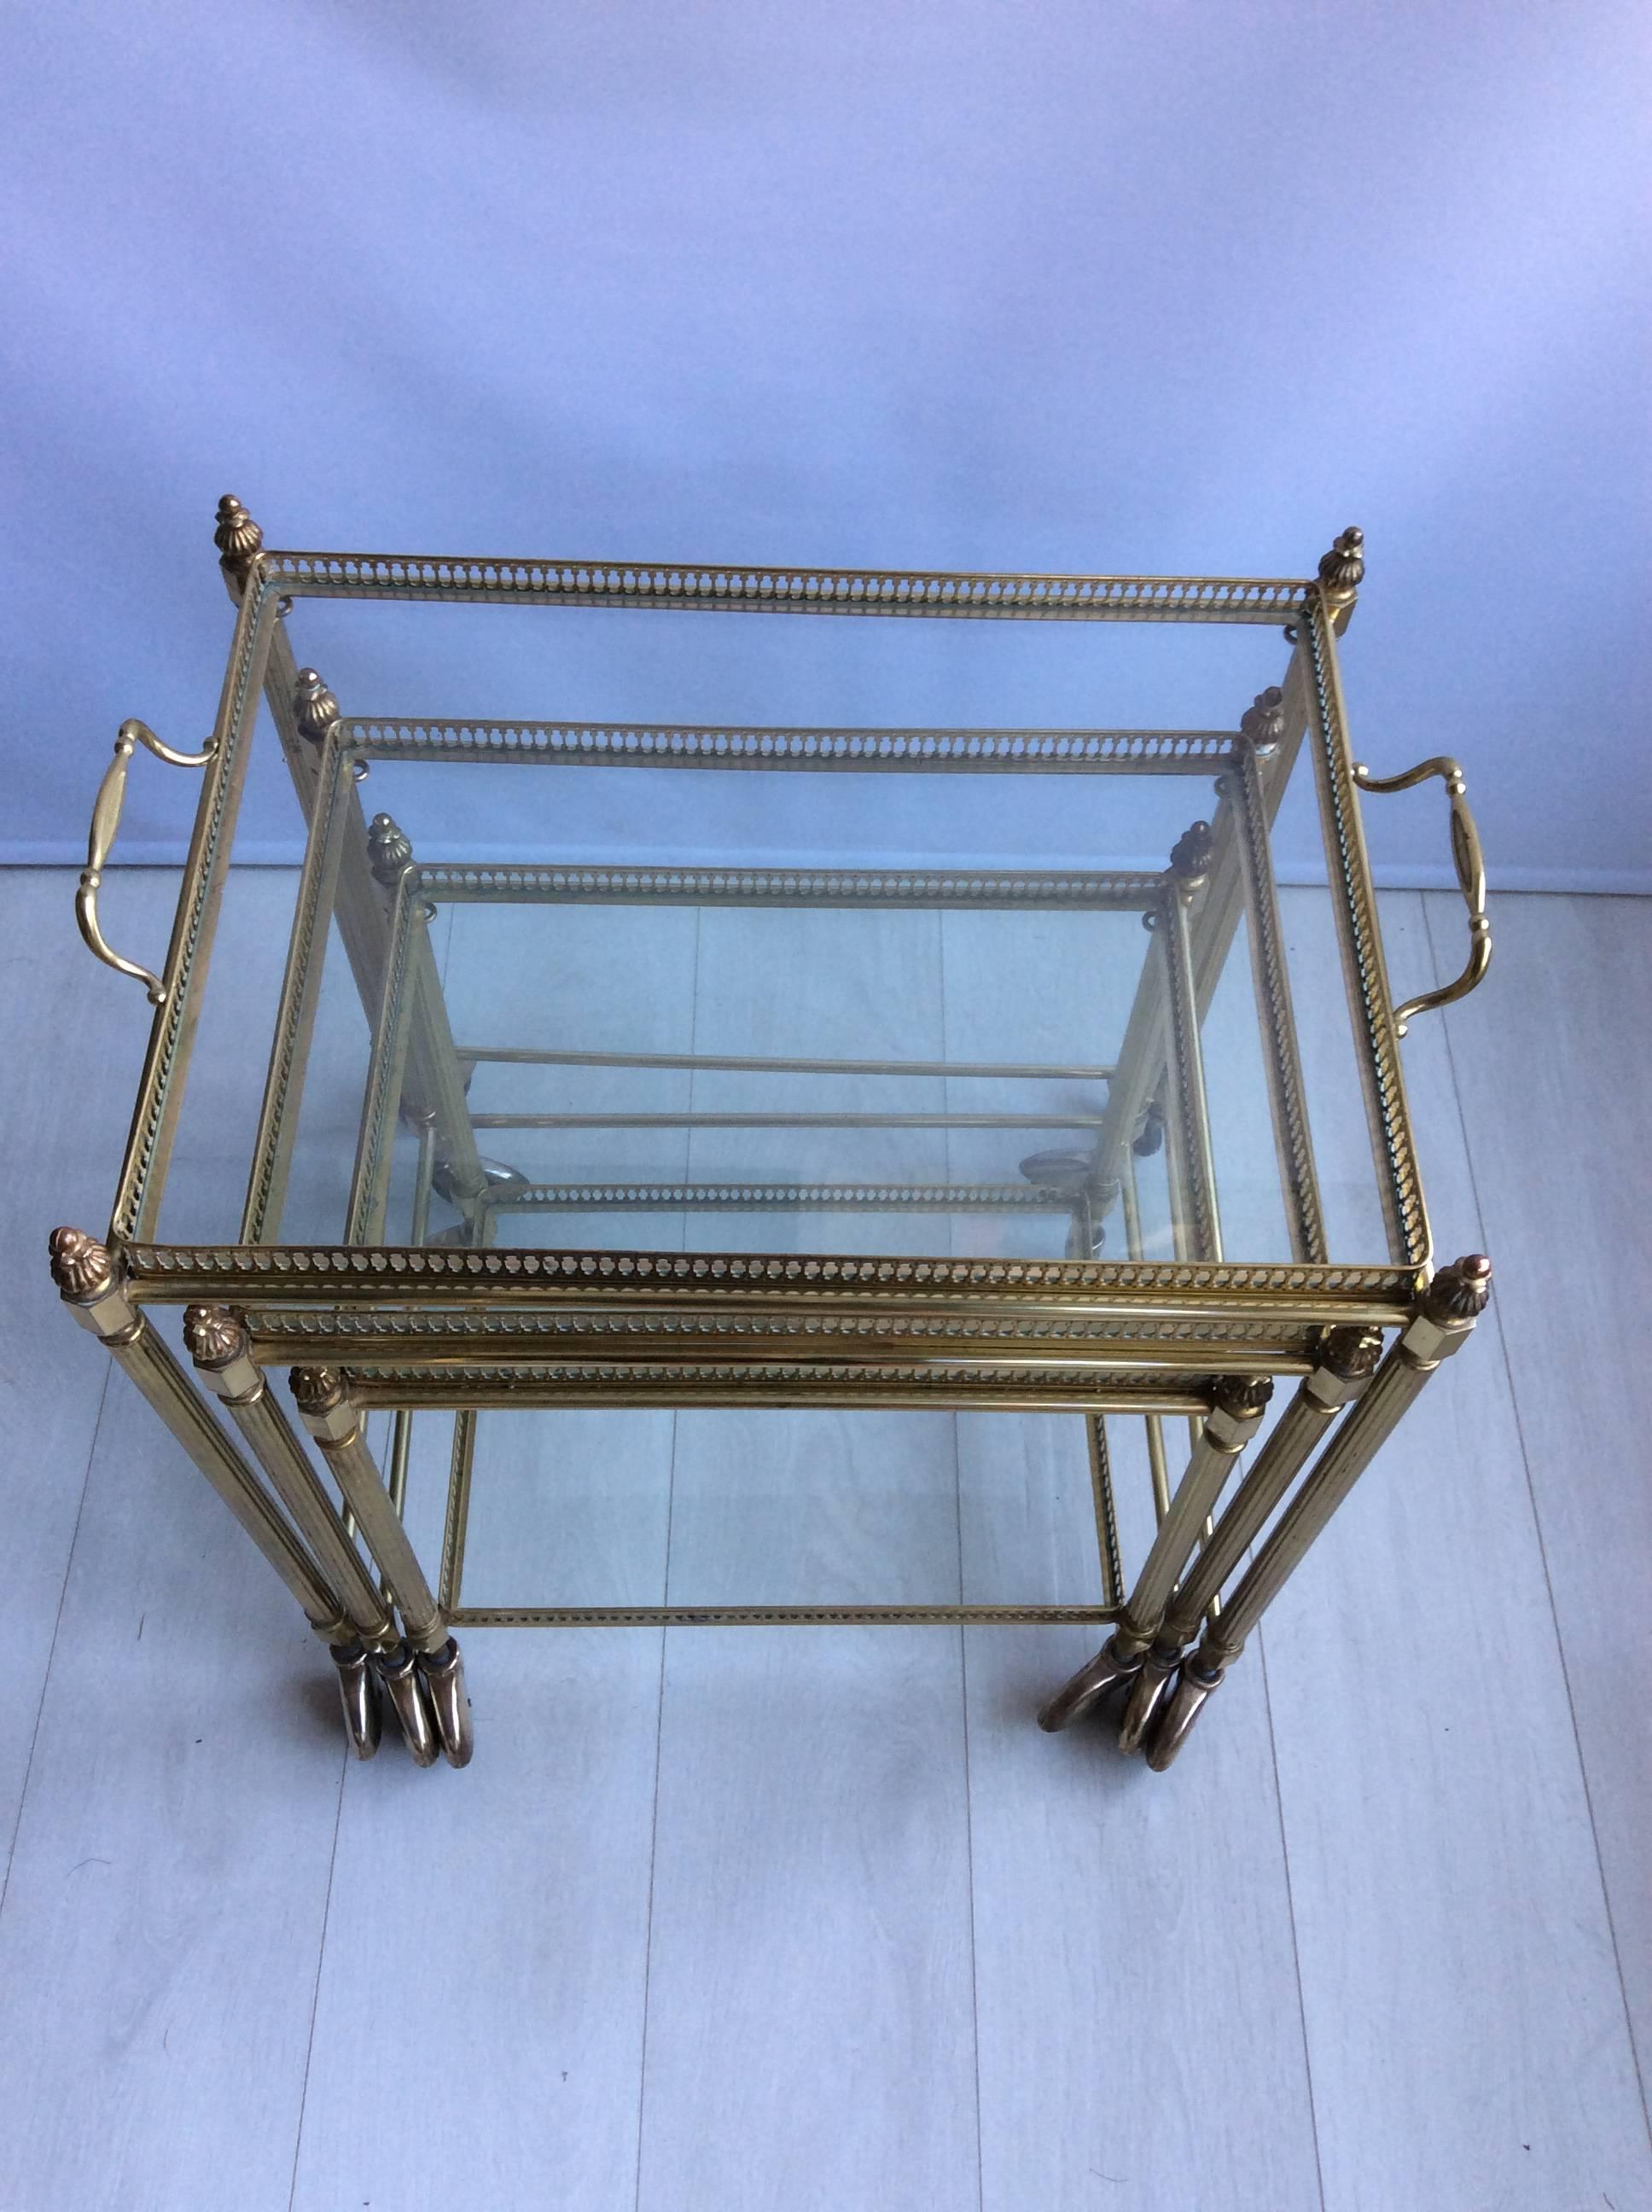 A nest of three French brass drinks trolleys or bar carts with removable tops, circa 1950.

Largest trolley measures 59cm wide, 41cm deep and 62cm tall.
Middle 50cm wide, 36.5cm deep.
Small 43.5cm wide, 31.5cm deep.